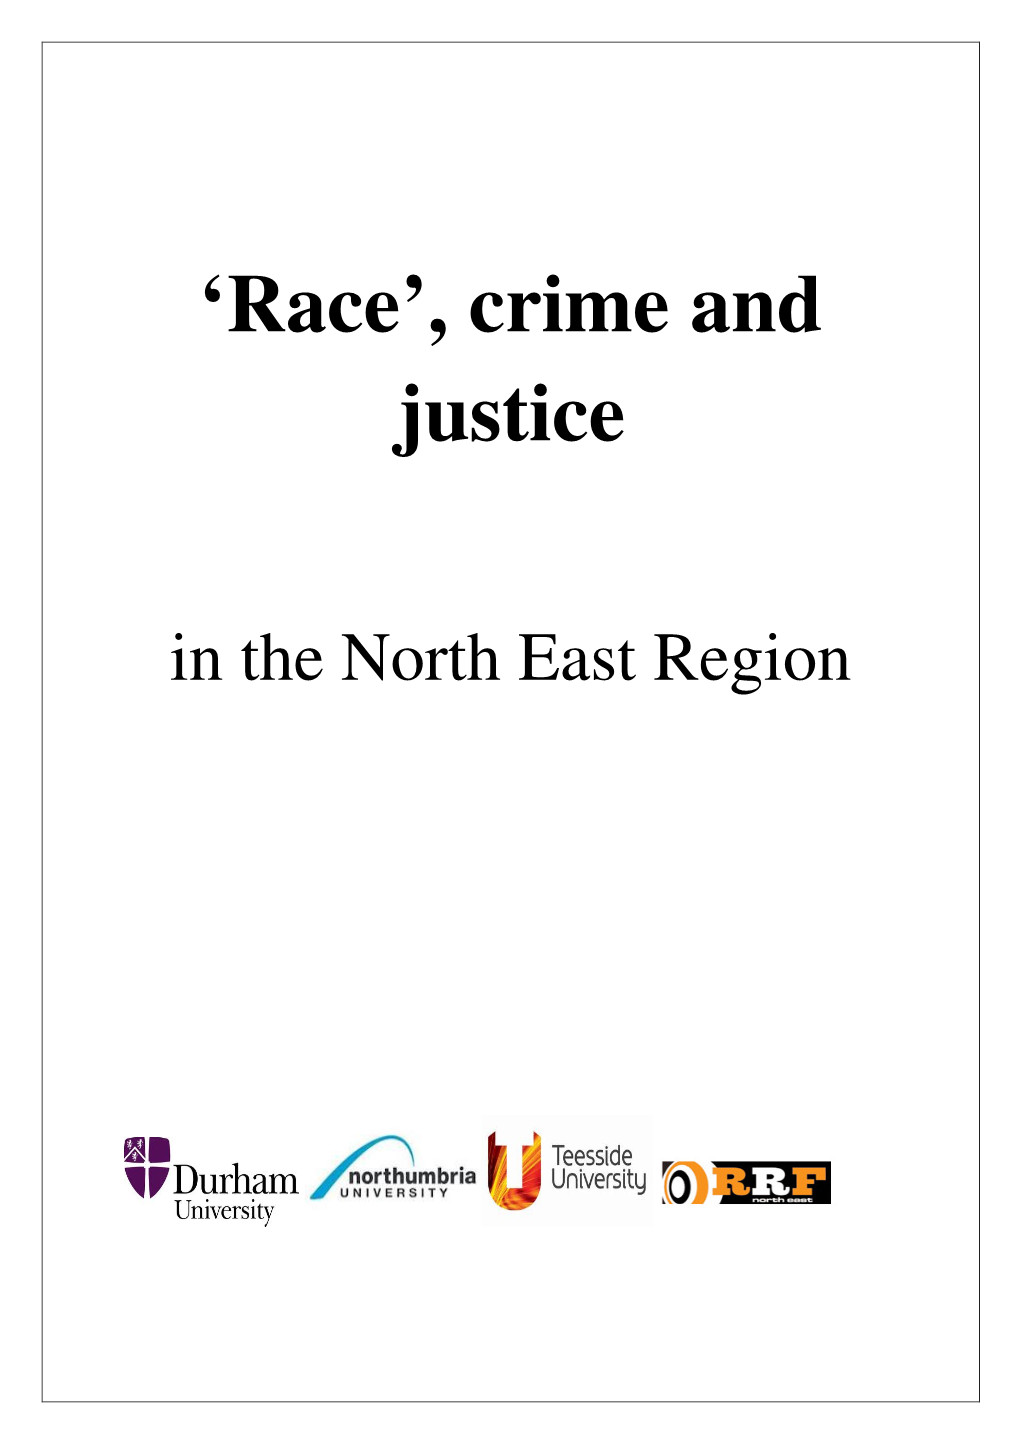 'Race', Crime and Justice Research Group: Durham University